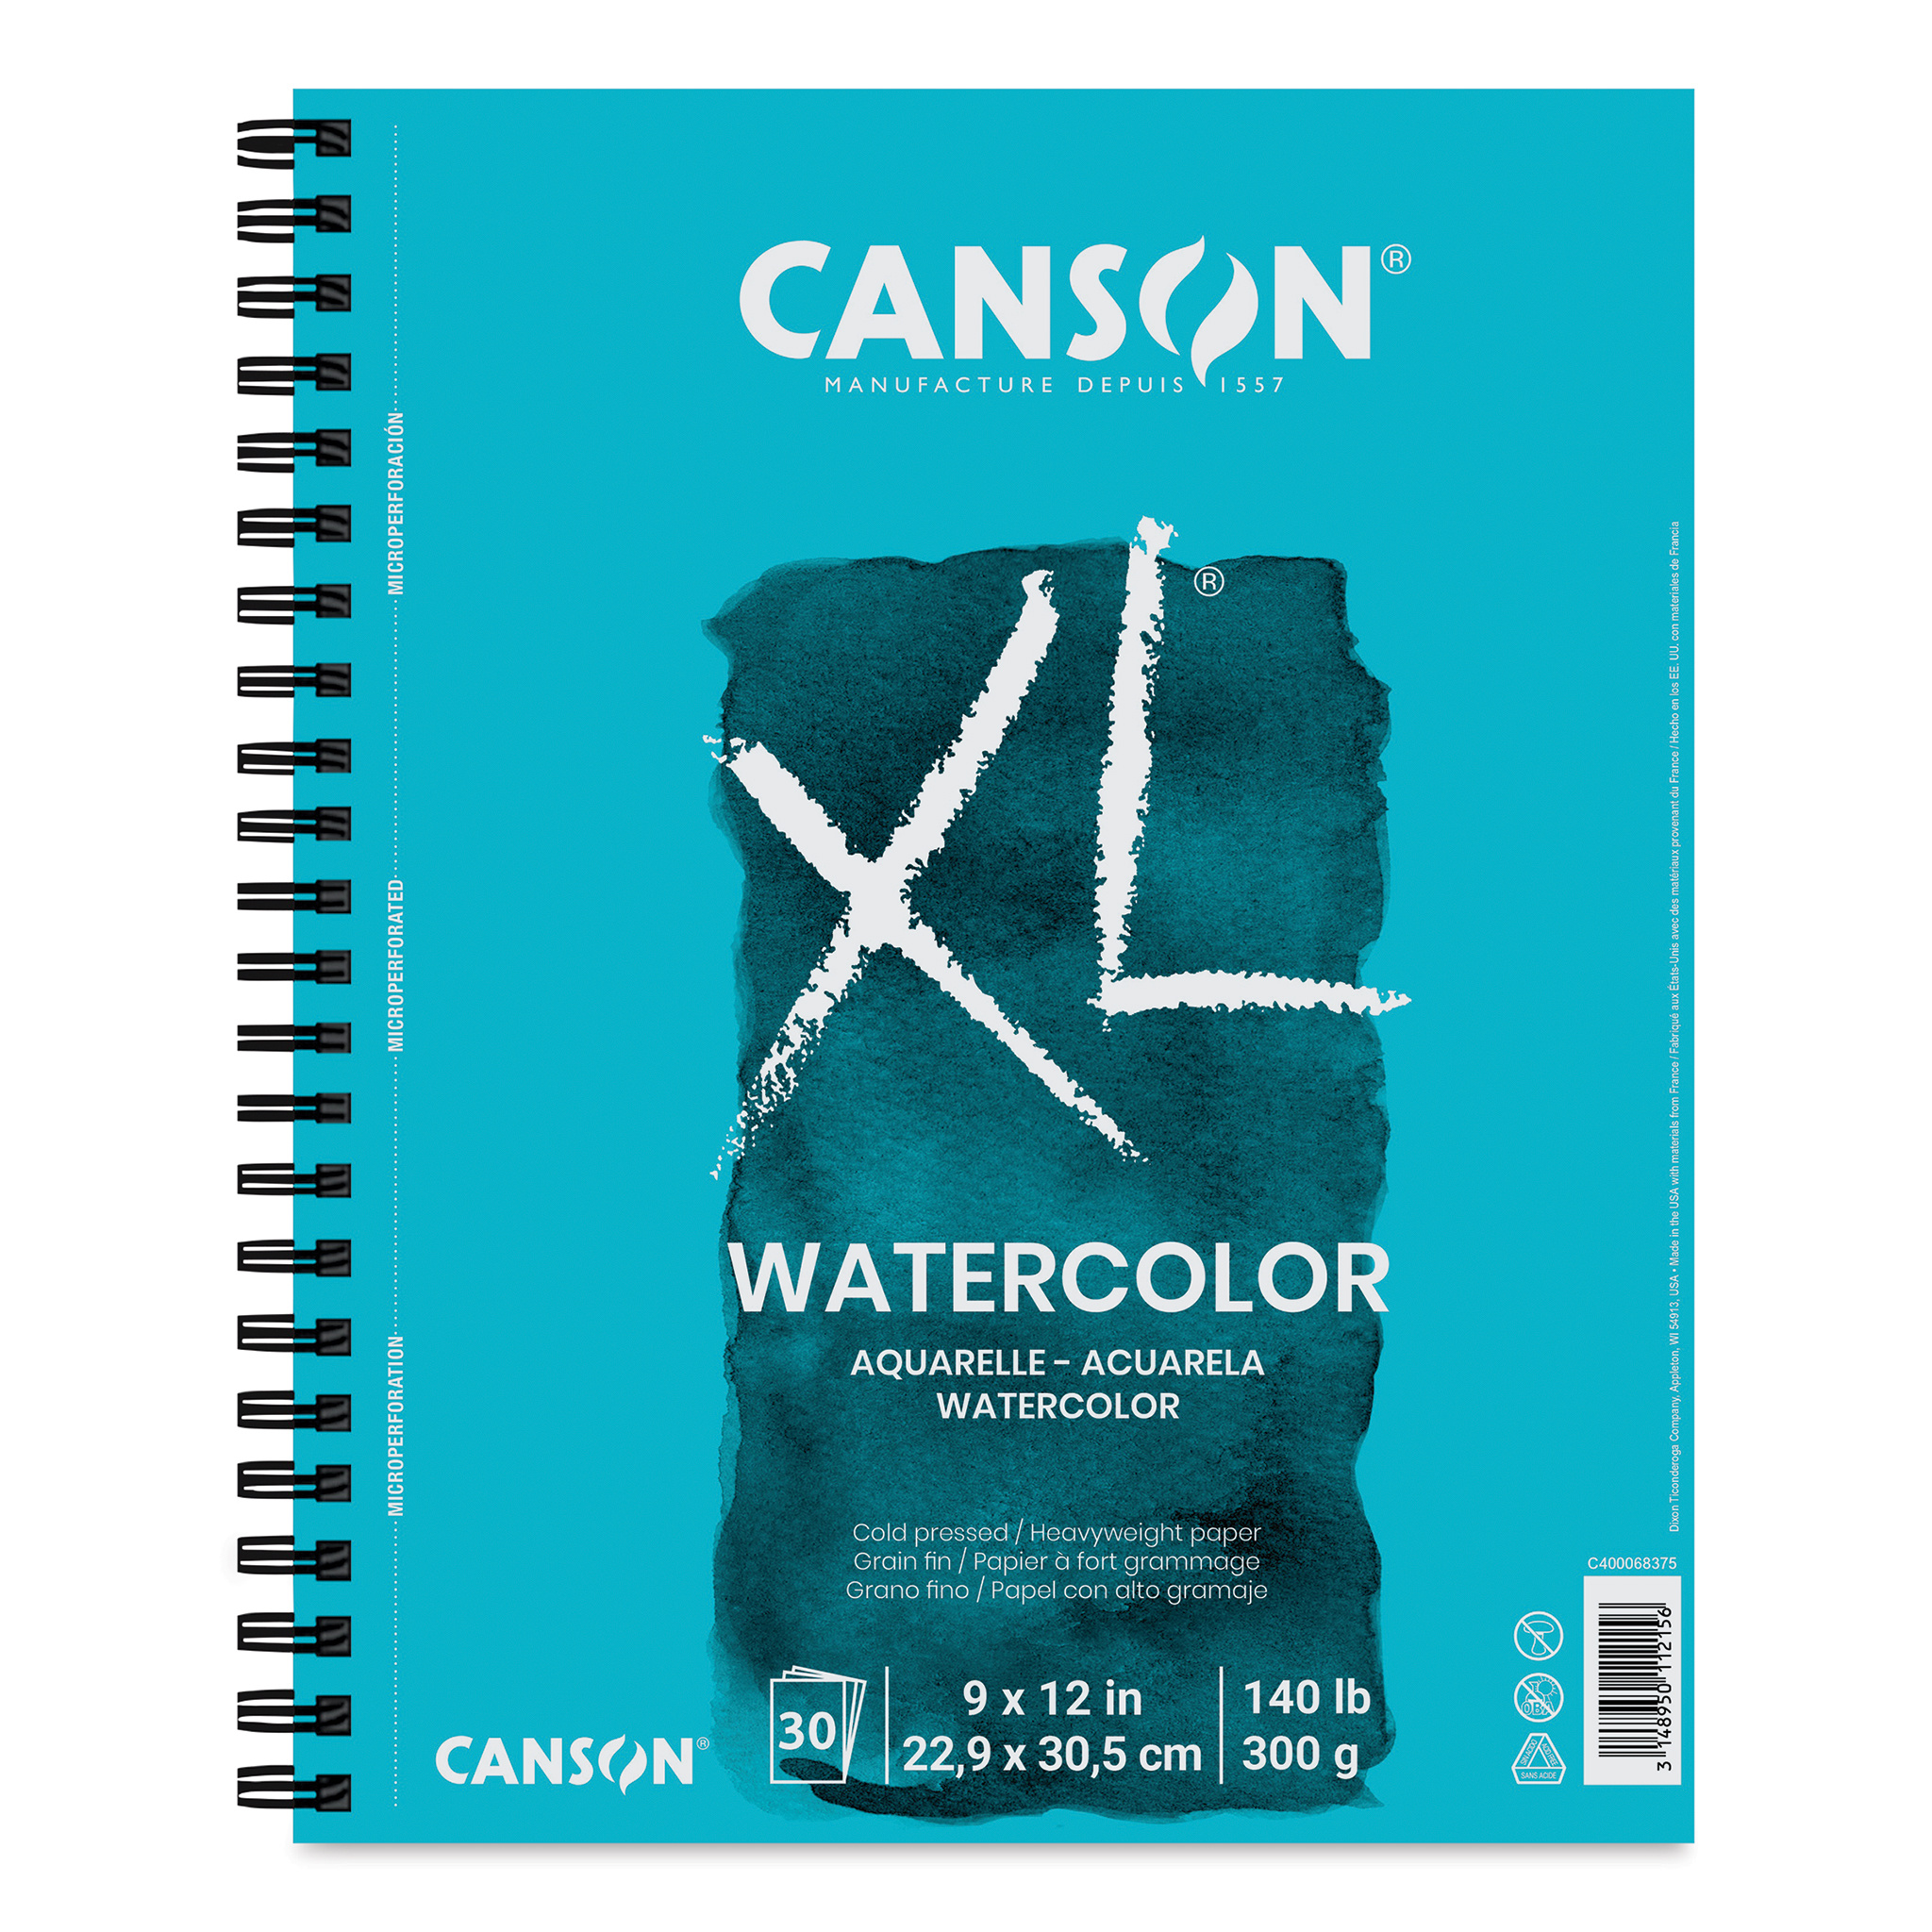 Canson Watercolor Lettering Pad 9x12 20 Sheets – A Work of Heart